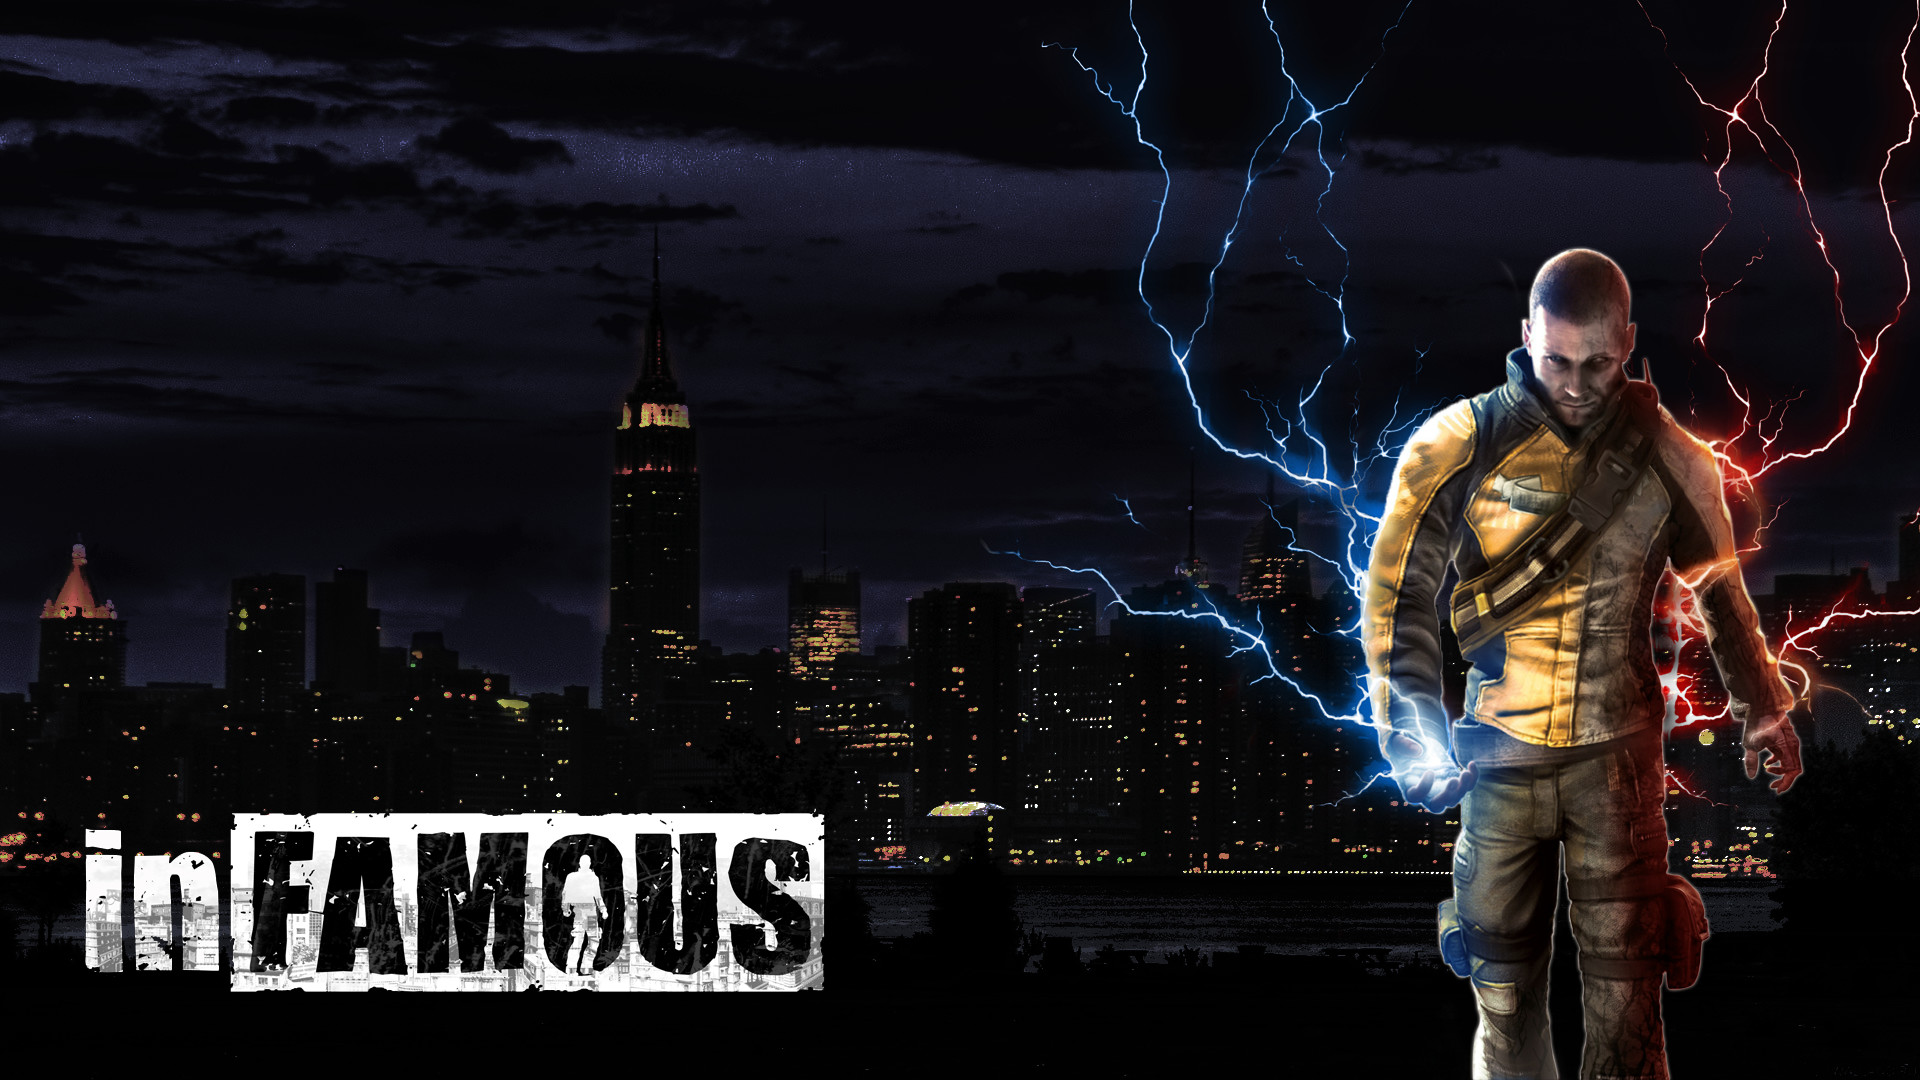 1920x1080 inFAMOUS - Wallpaper by guichearmo inFAMOUS - Wallpaper by guichearmo